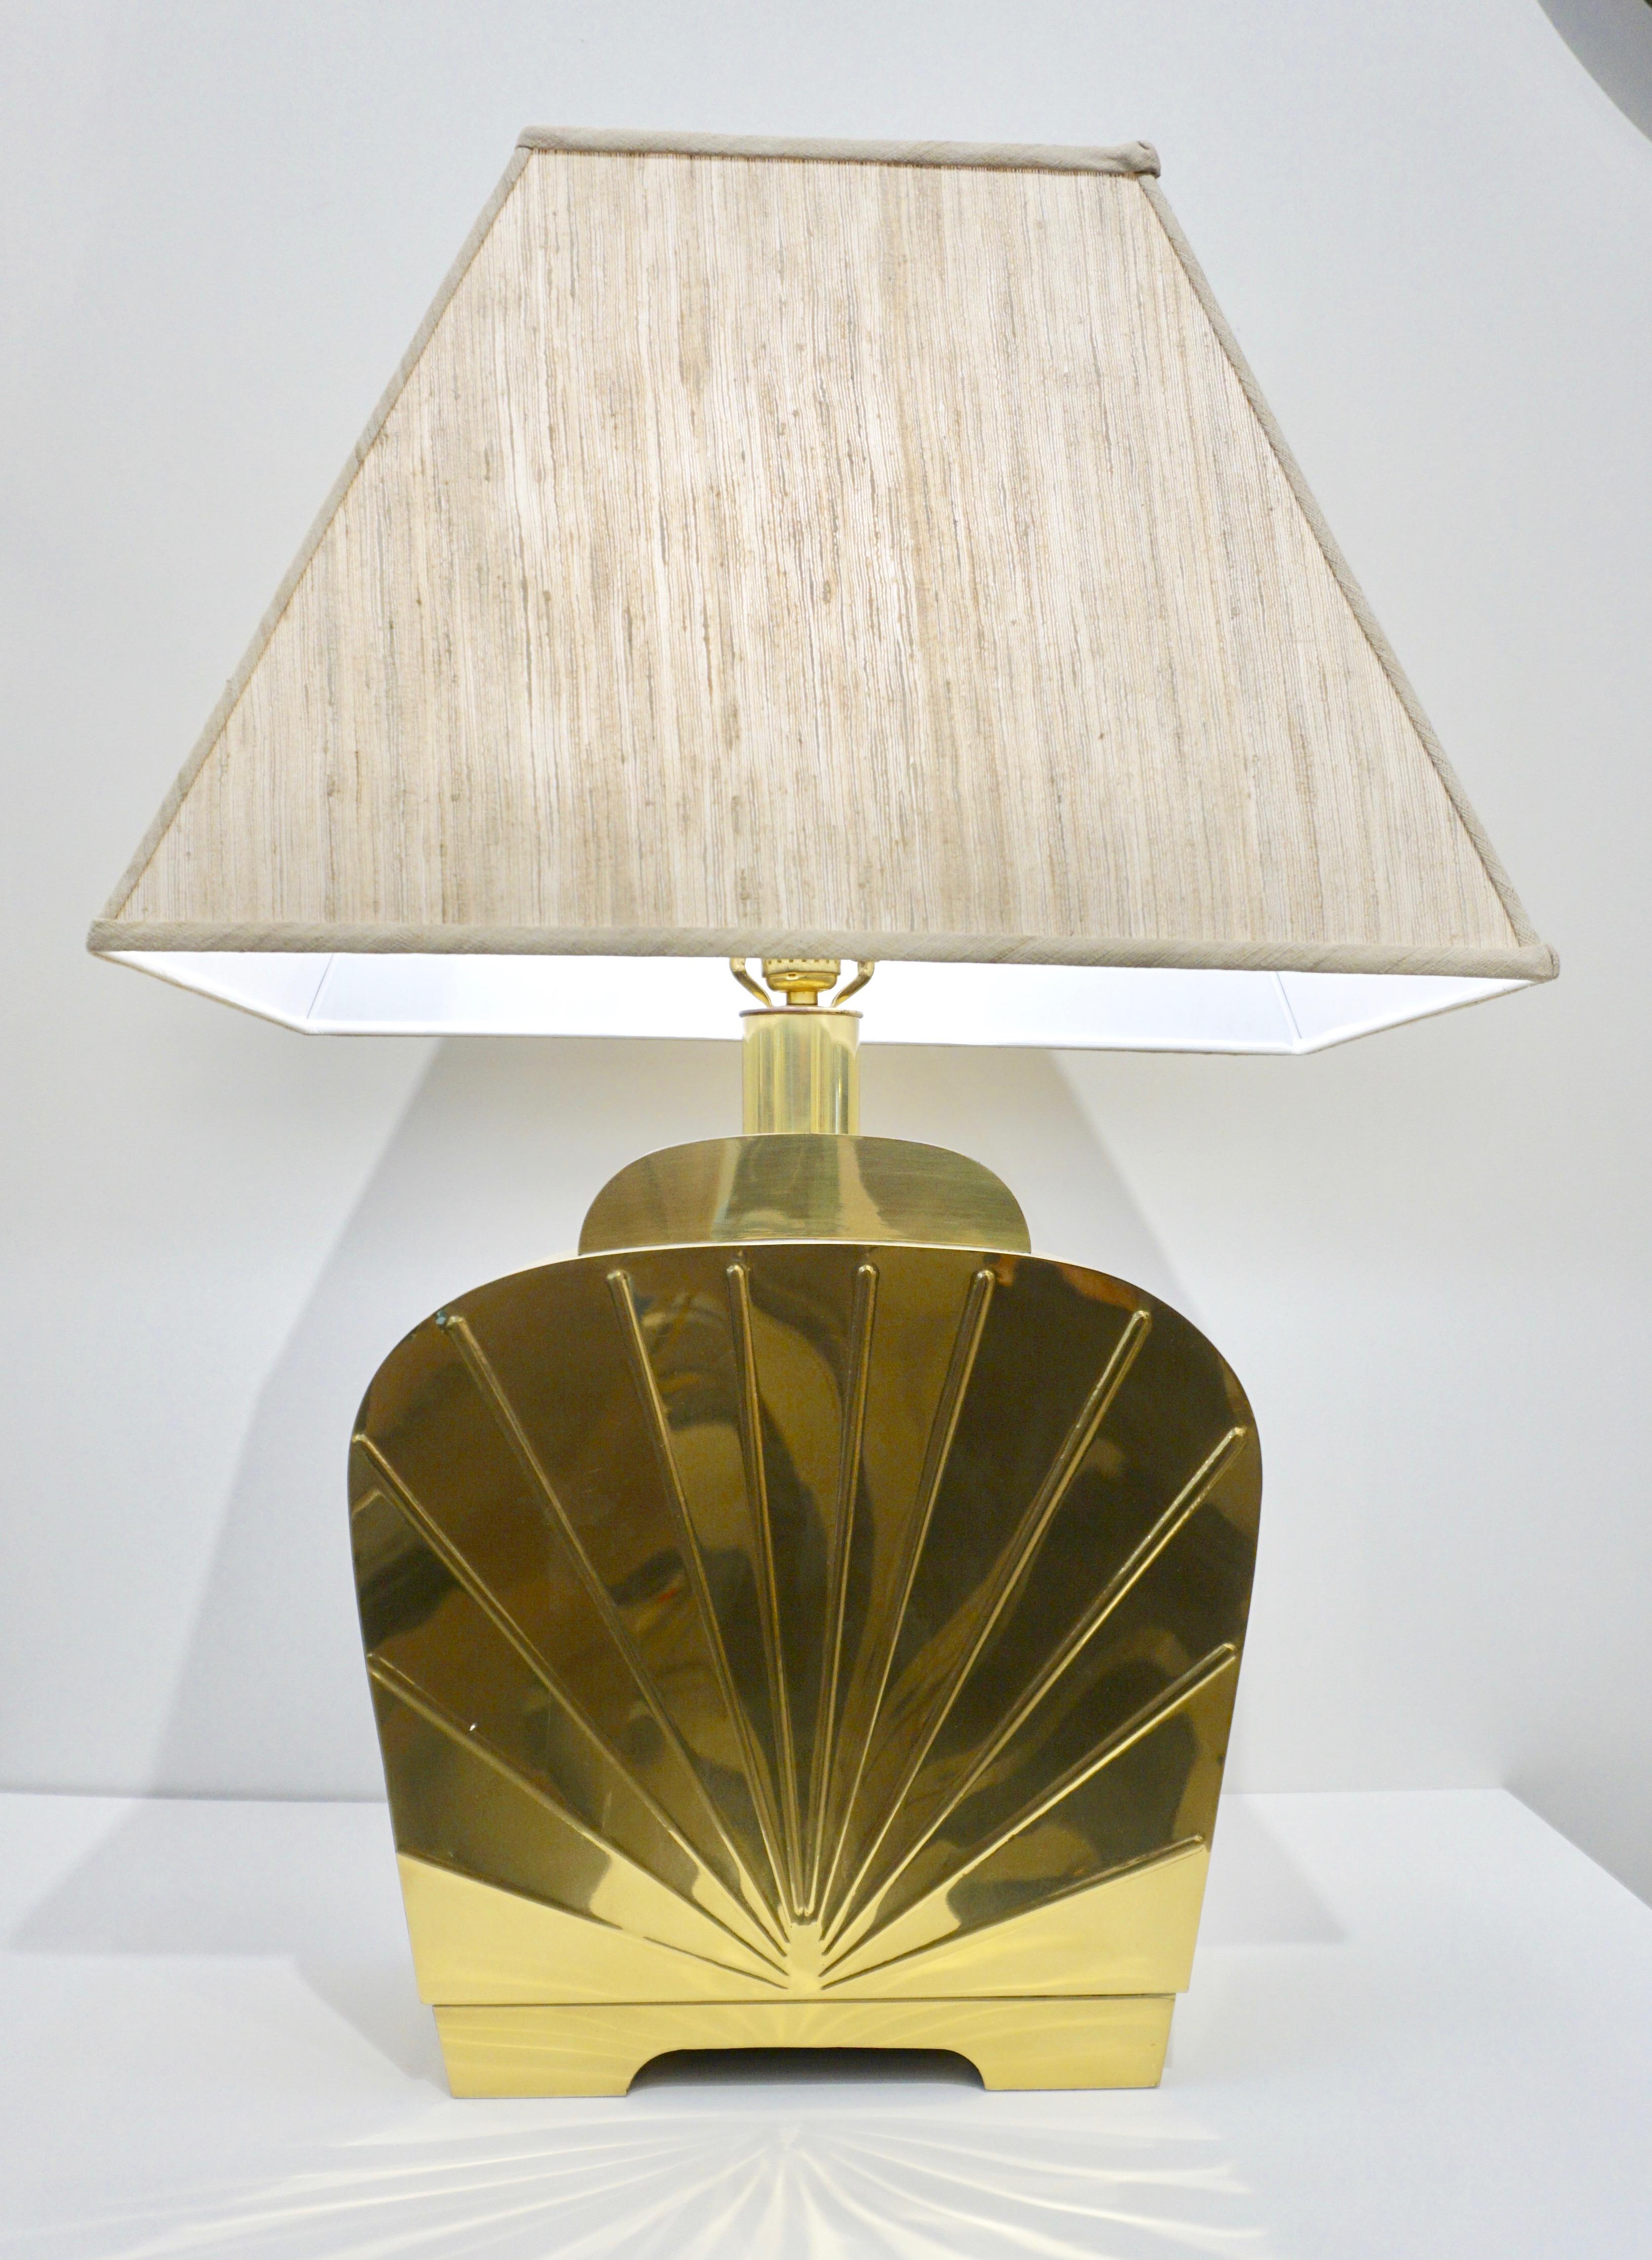 A very chic vintage pair of glamorous American Hollywood Regency table lamps. Exquisite high quality of execution in handcrafted shiny gold heavy solid brass, the streamline organic shape is elegantly decorated with an Art Deco style cast decor in